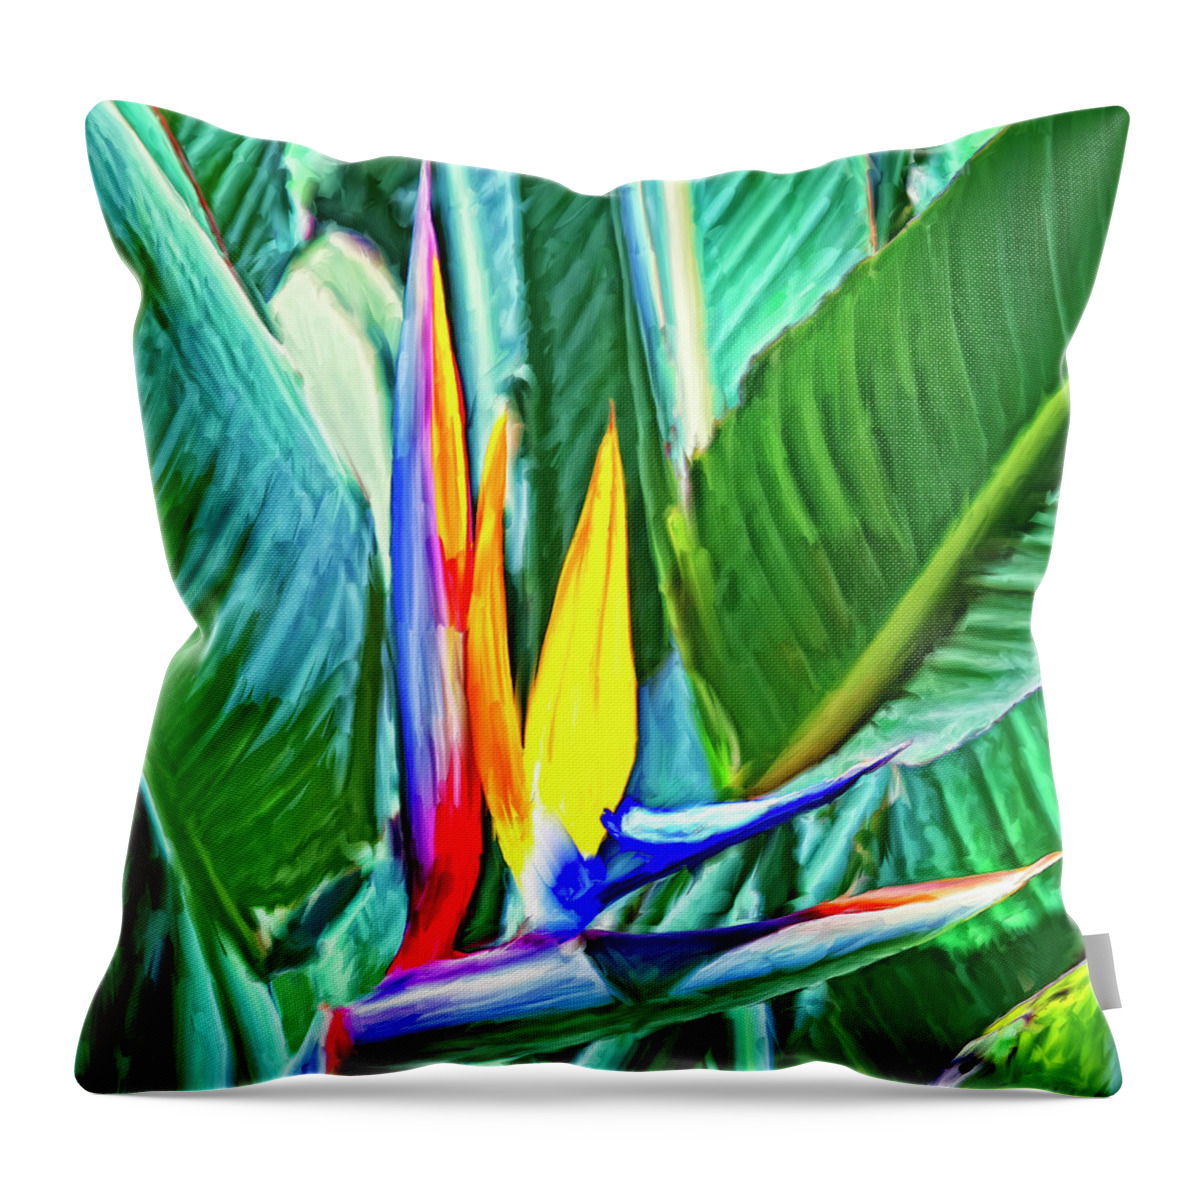 Bird Of Paradise Throw Pillow featuring the painting Bird of Paradise by Dominic Piperata